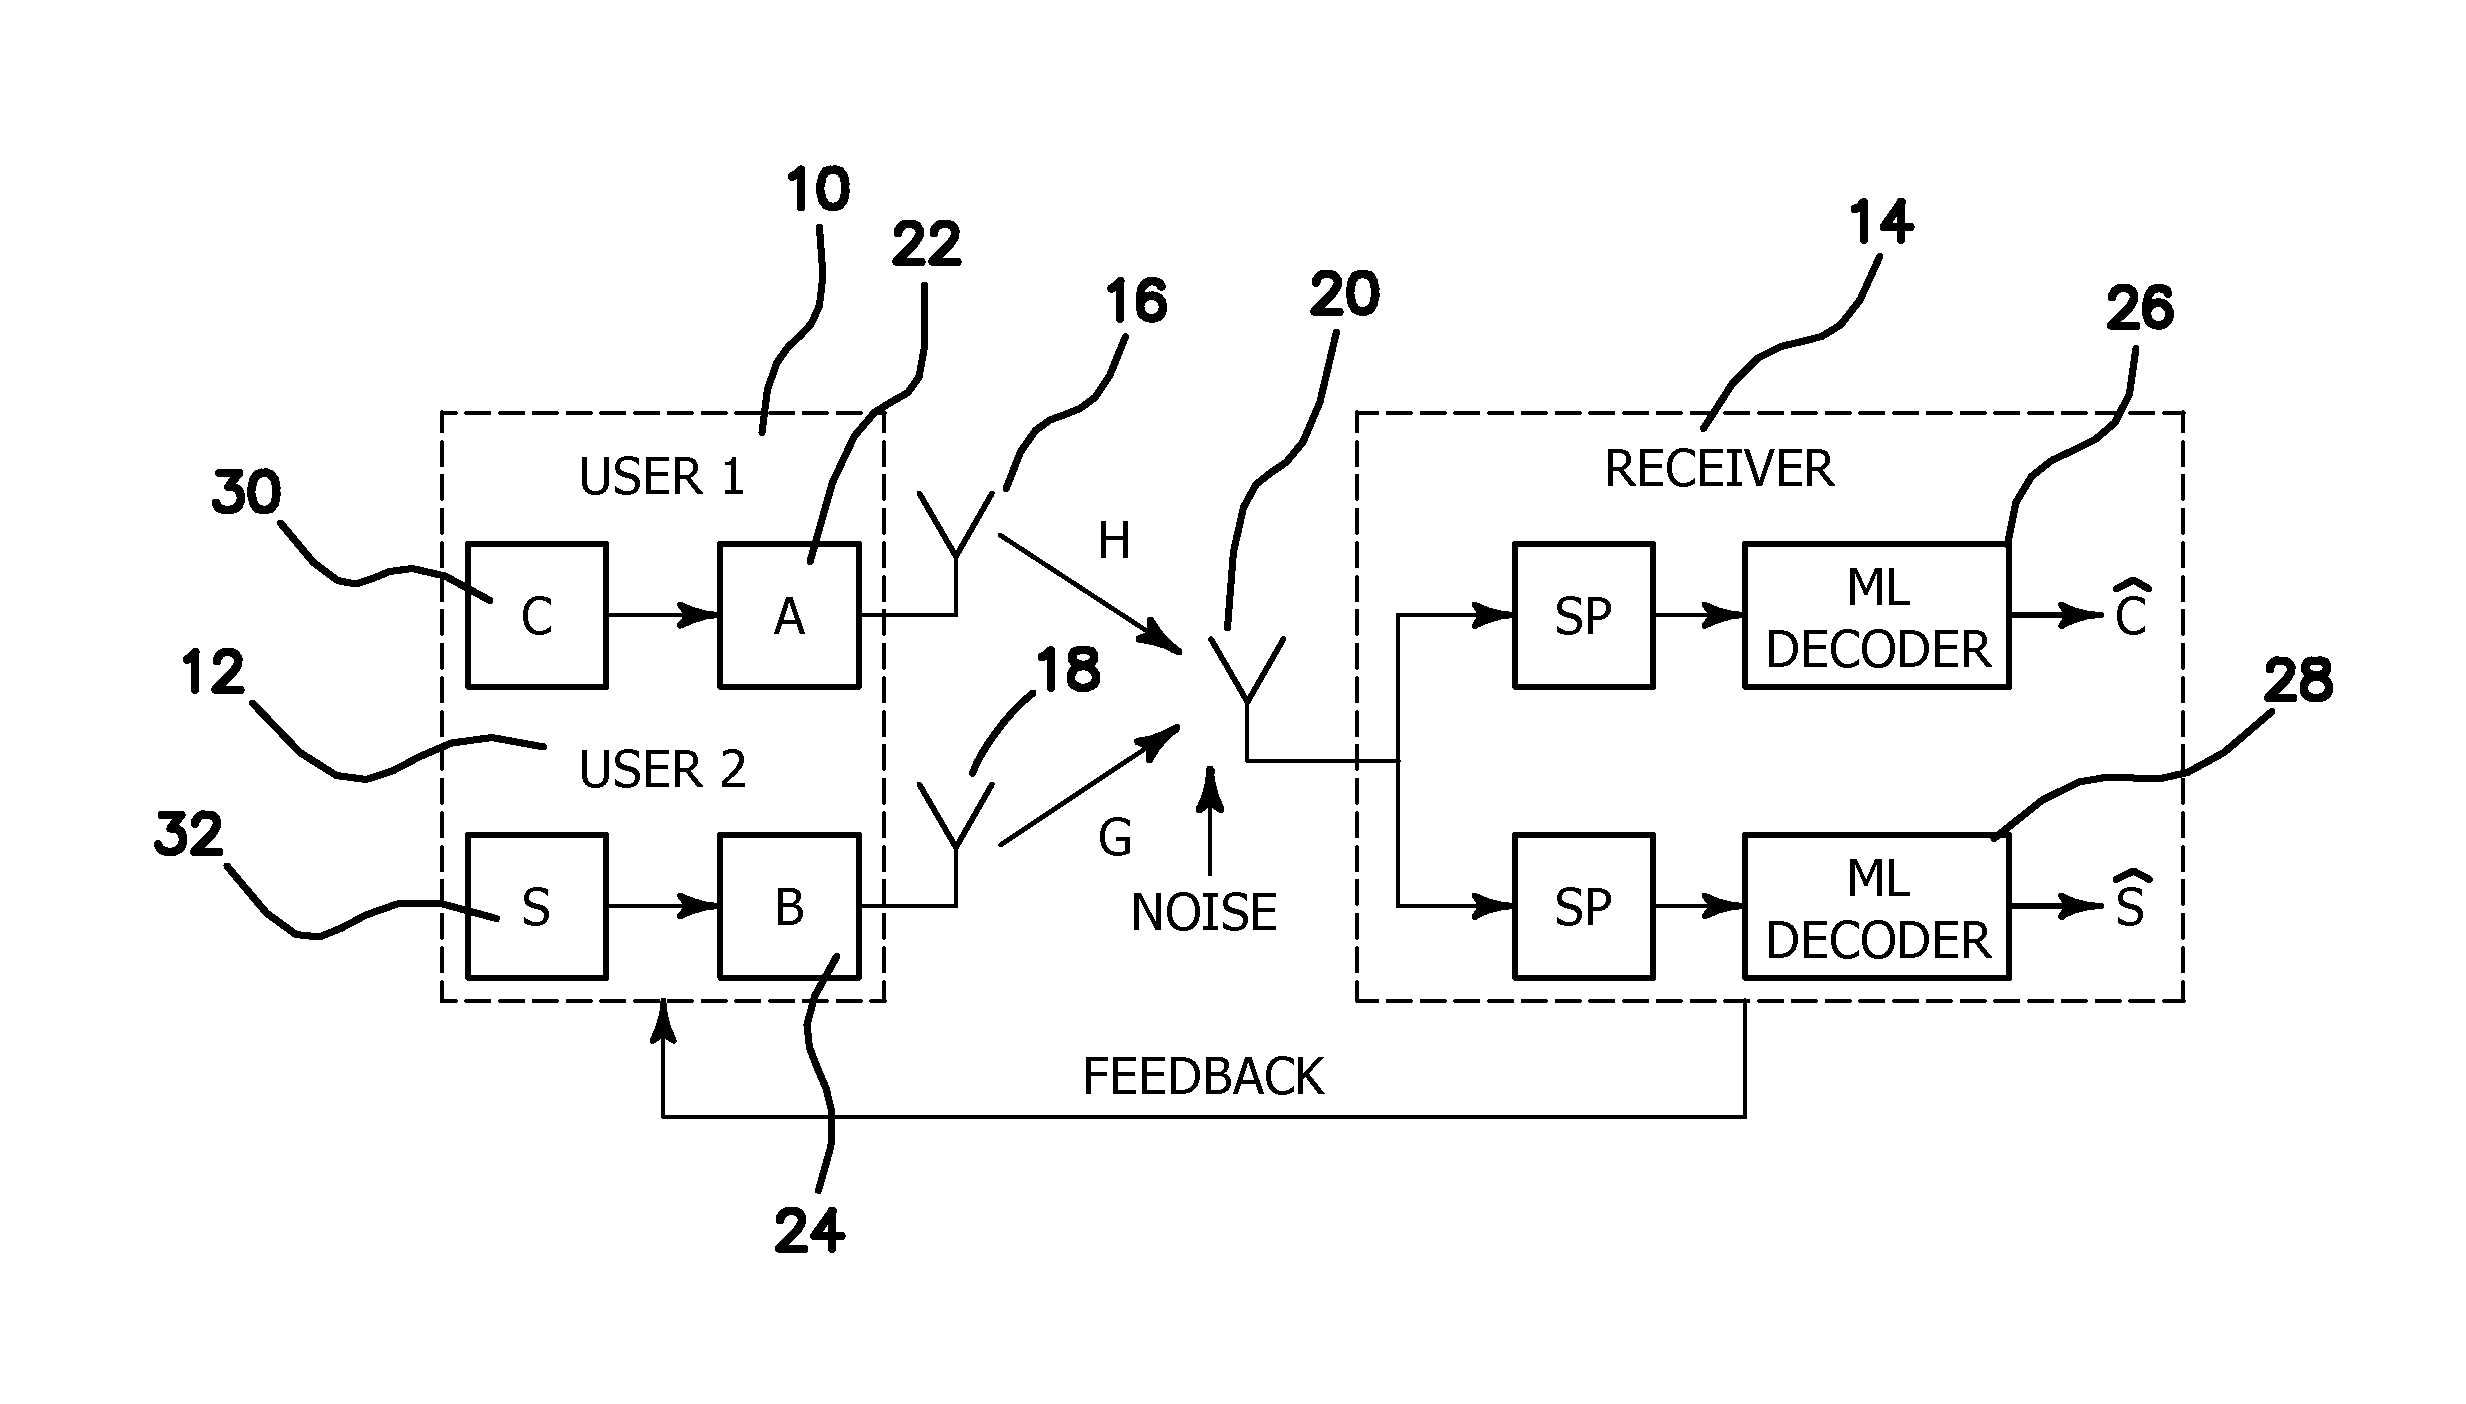 Method and apparatus for interference cancellation and detection using precoders